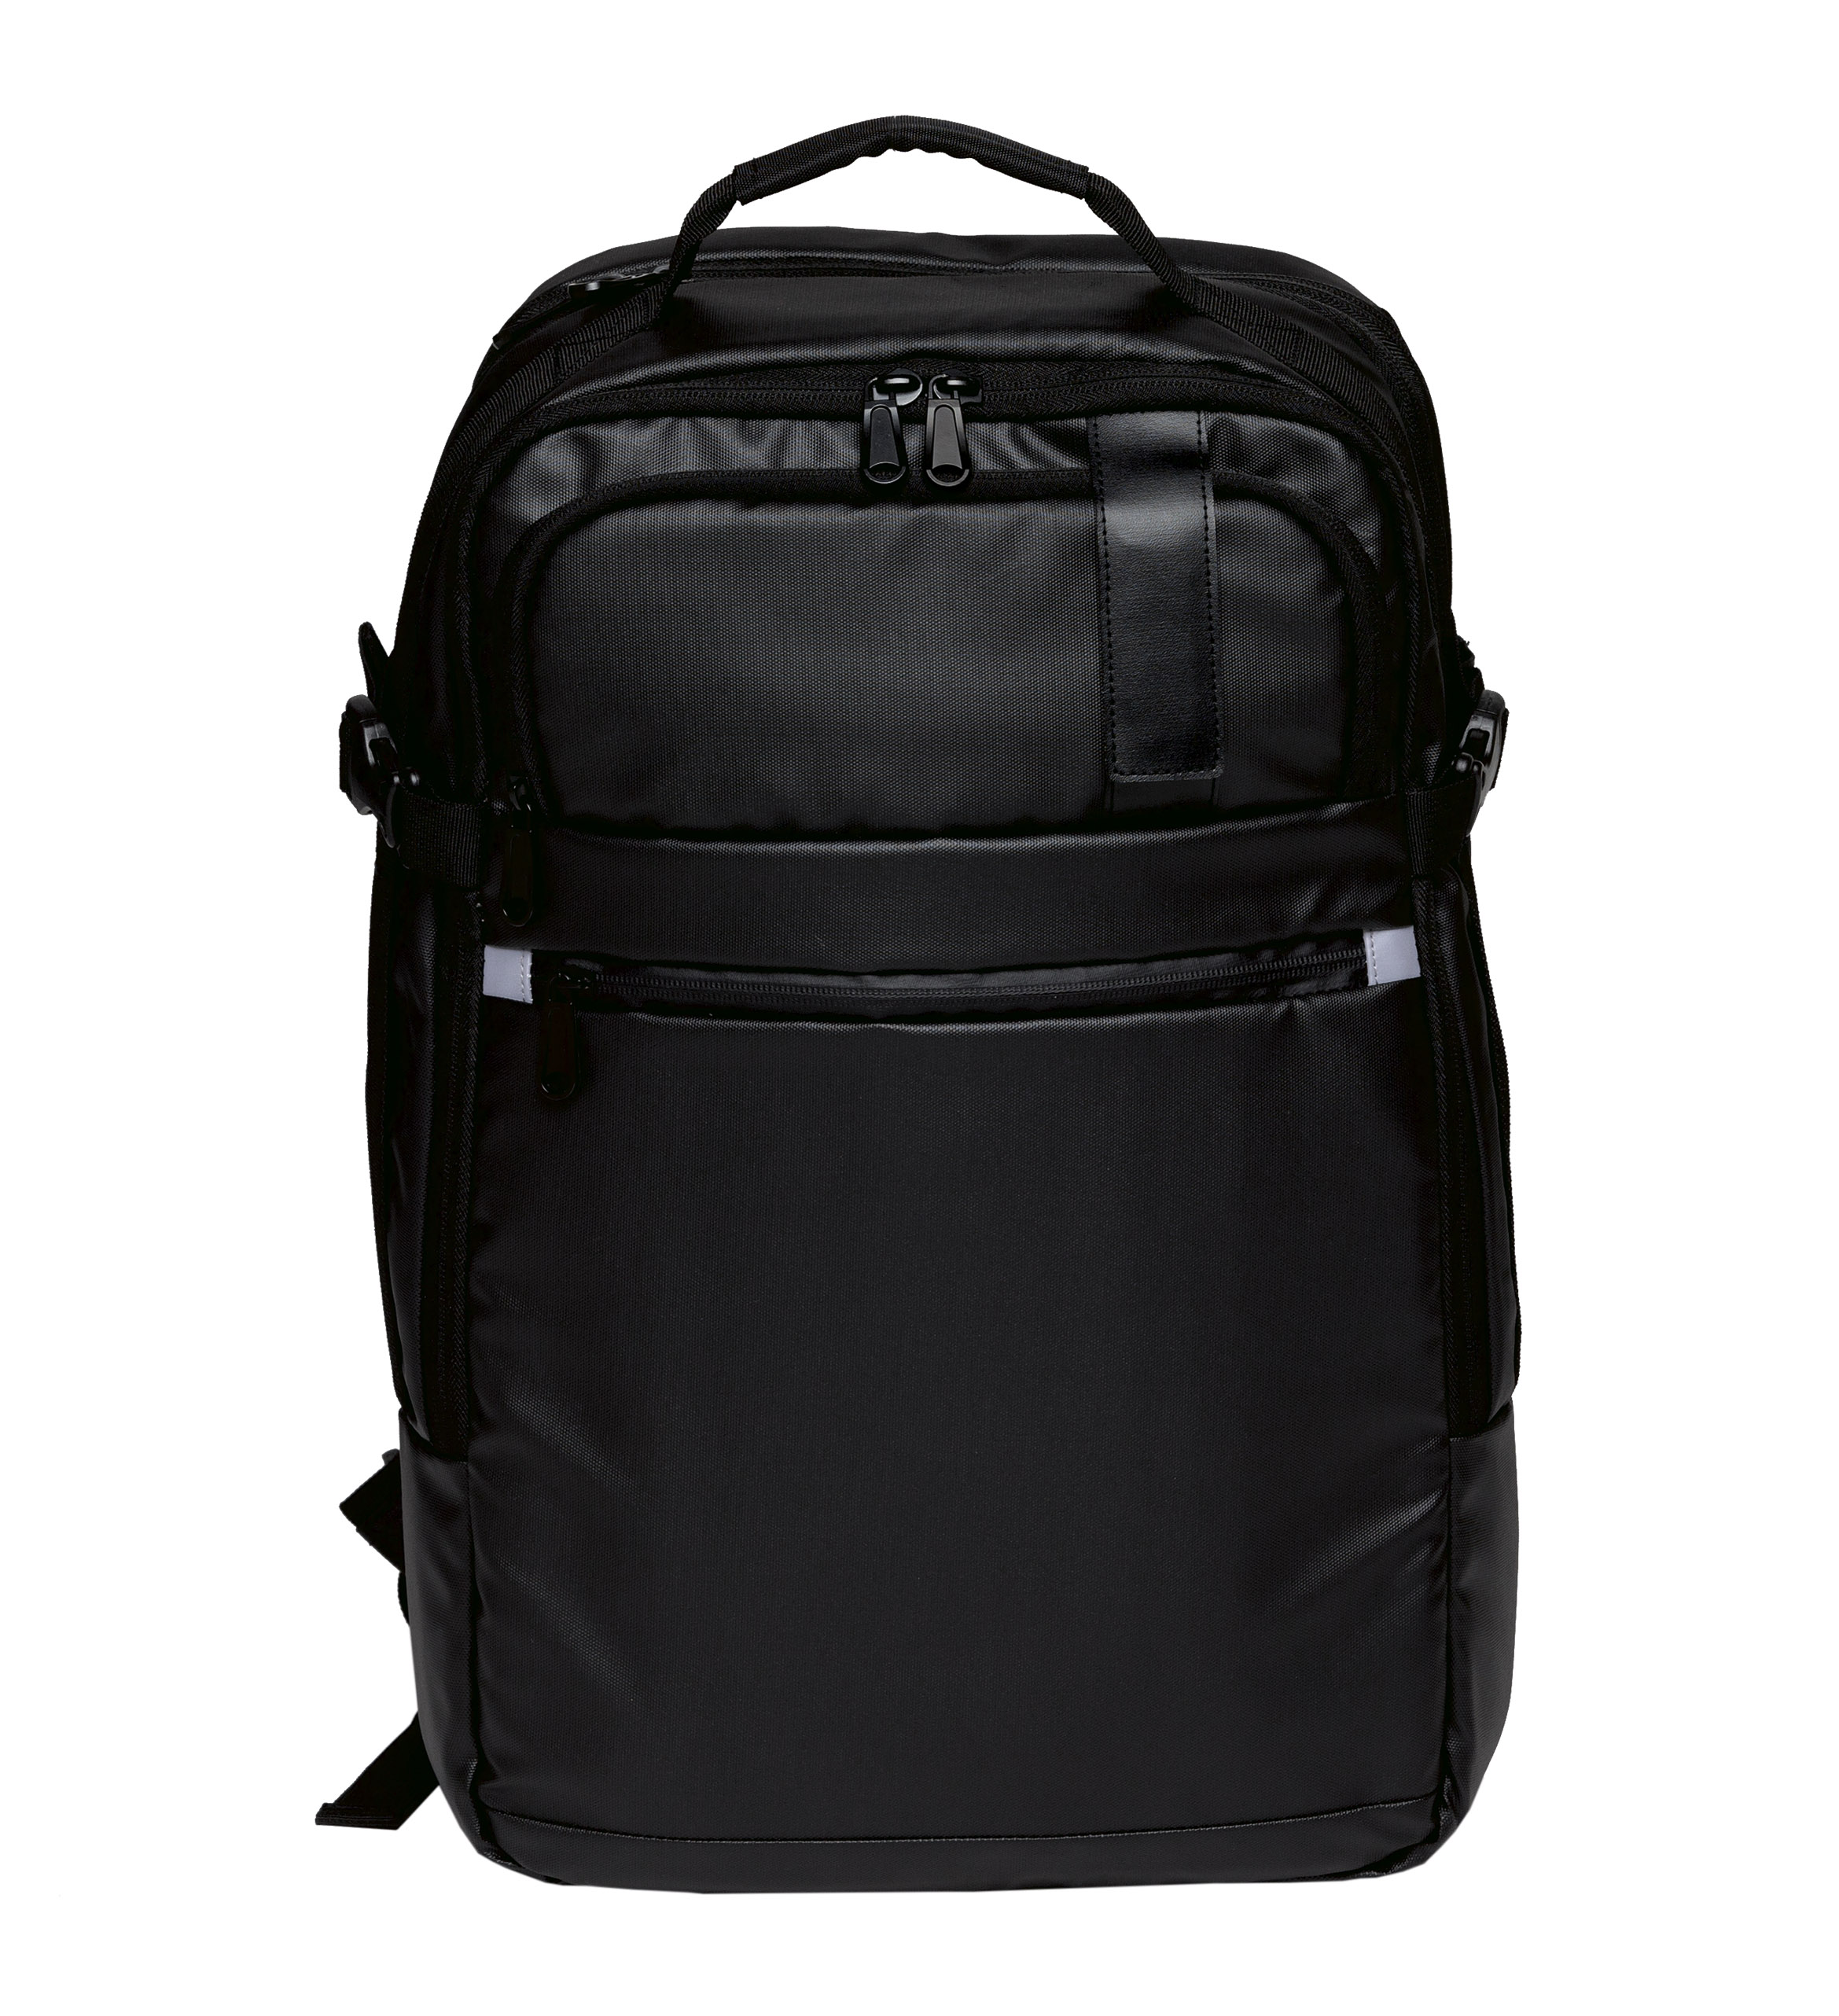 Tactic Compu Backpack - Image Group